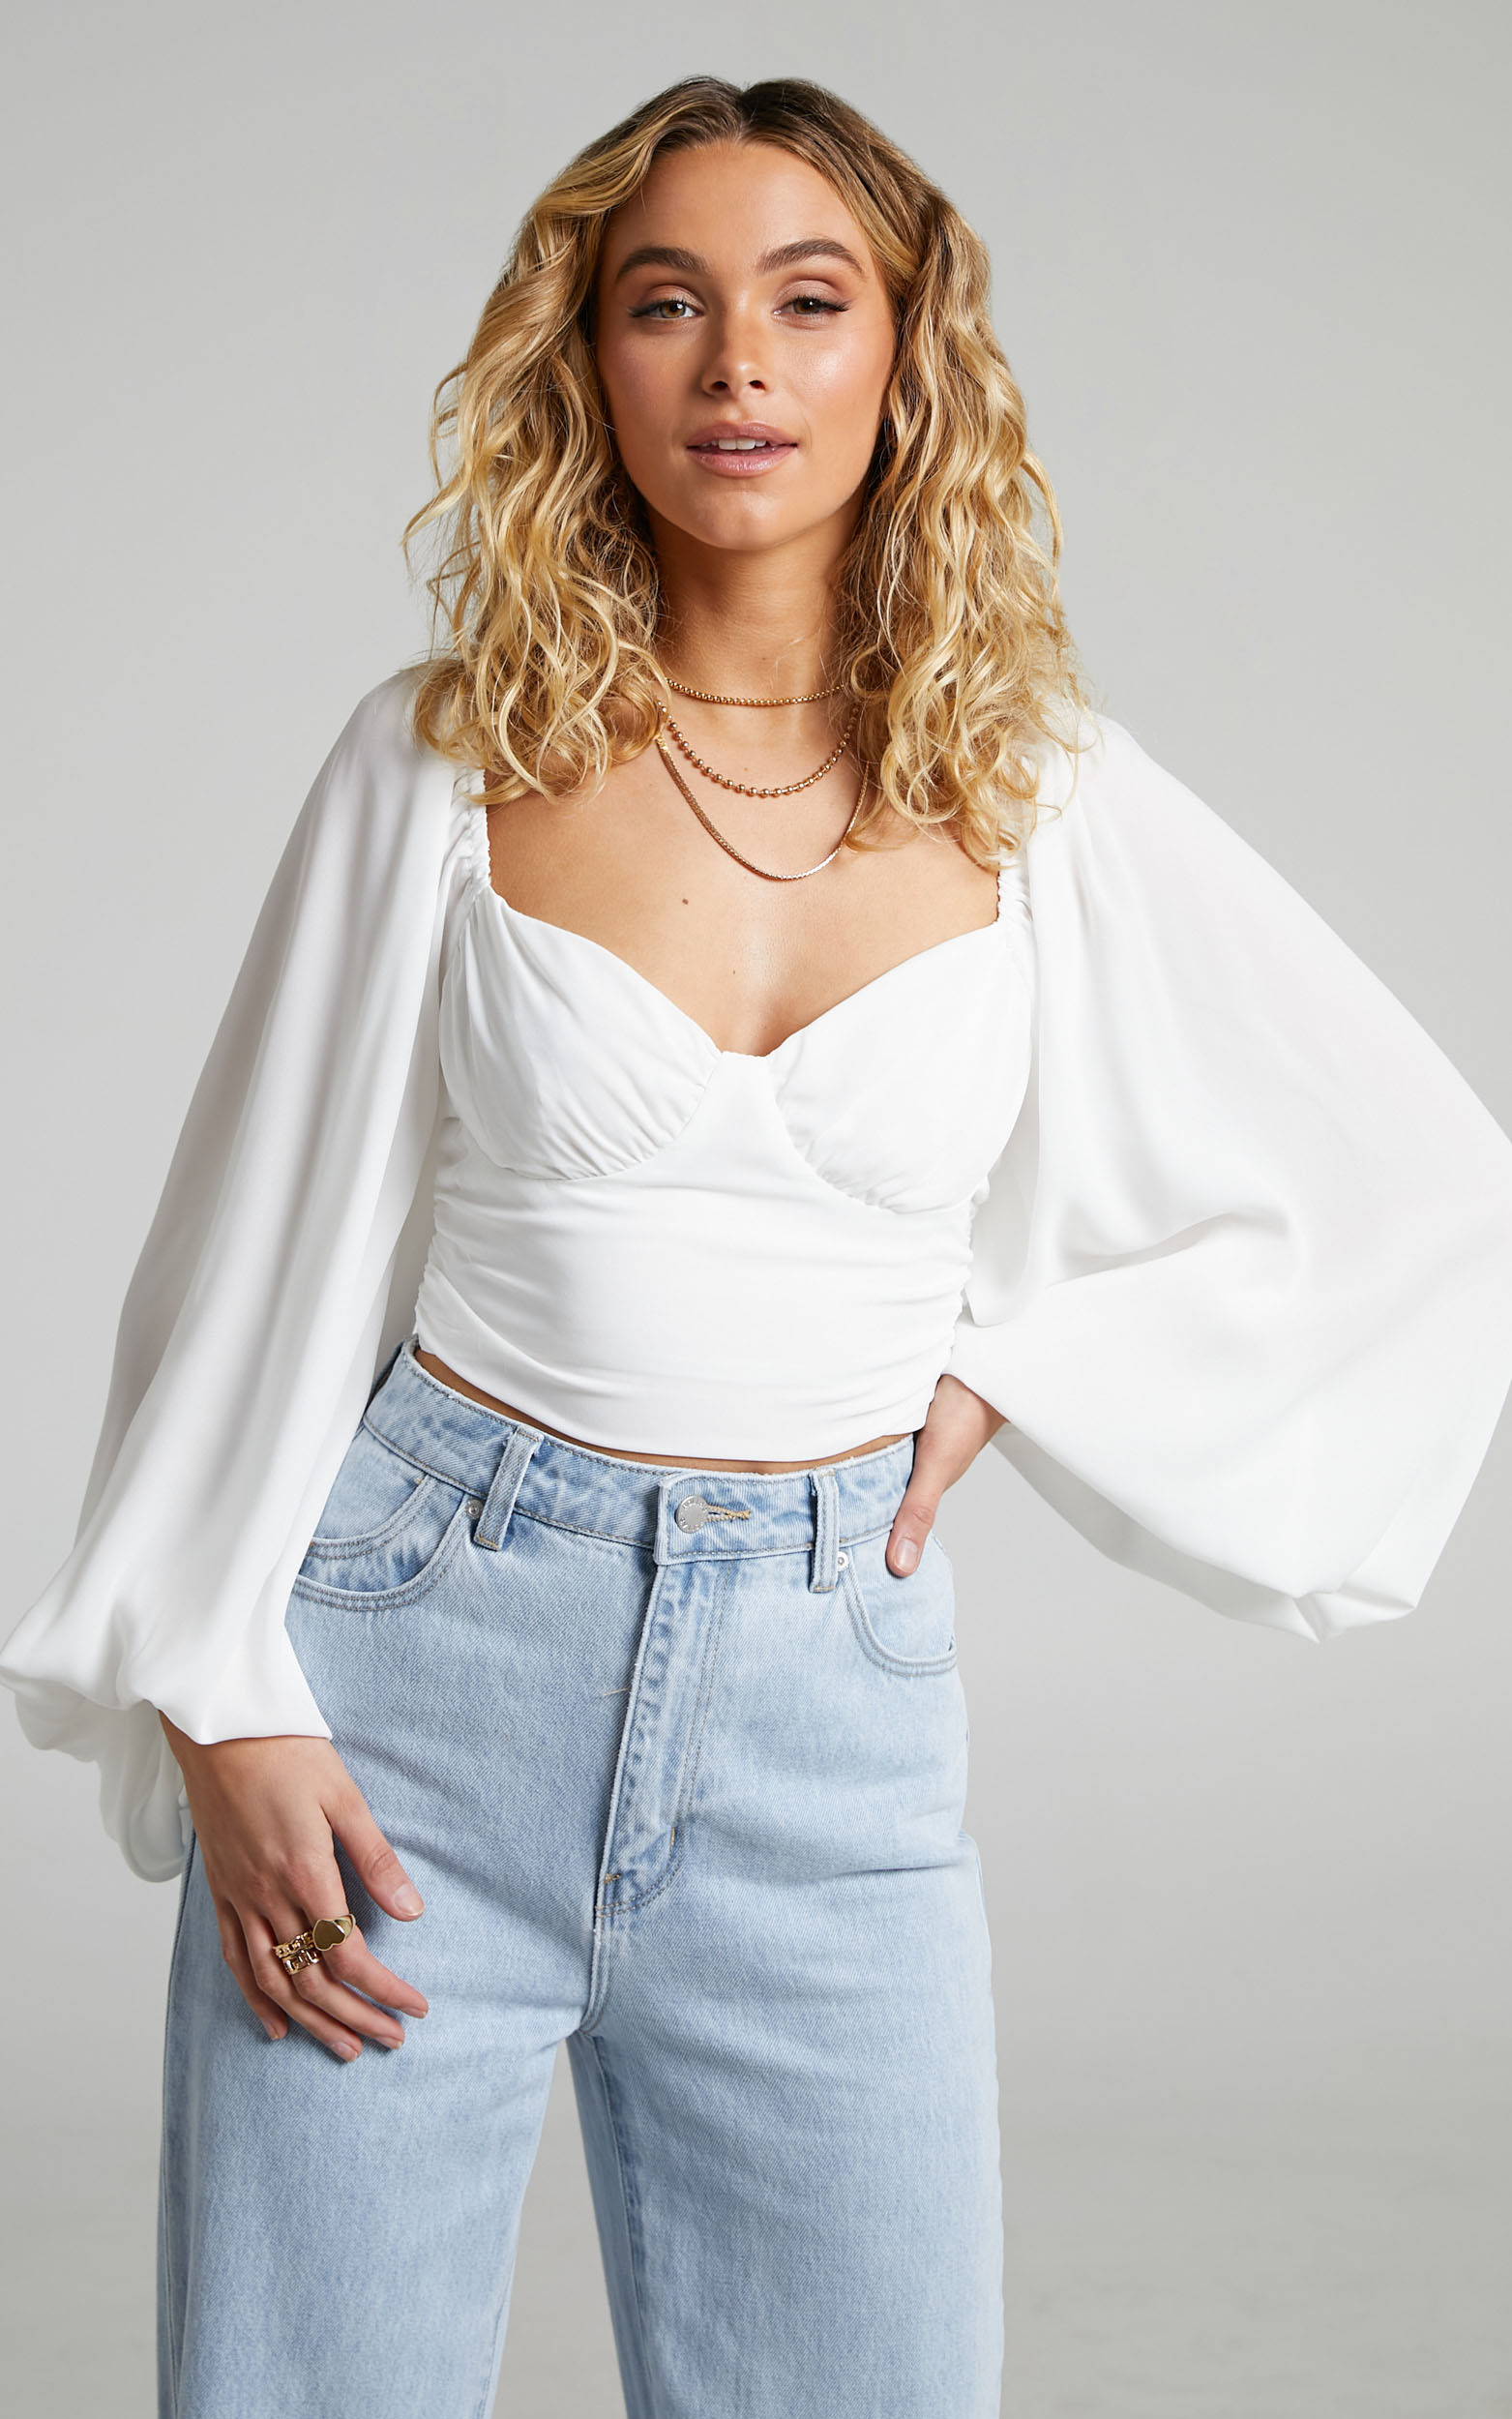 Follan Long Sleeve Shirred Back Bustier Crop Top in White - 04, WHT1, hi-res image number null